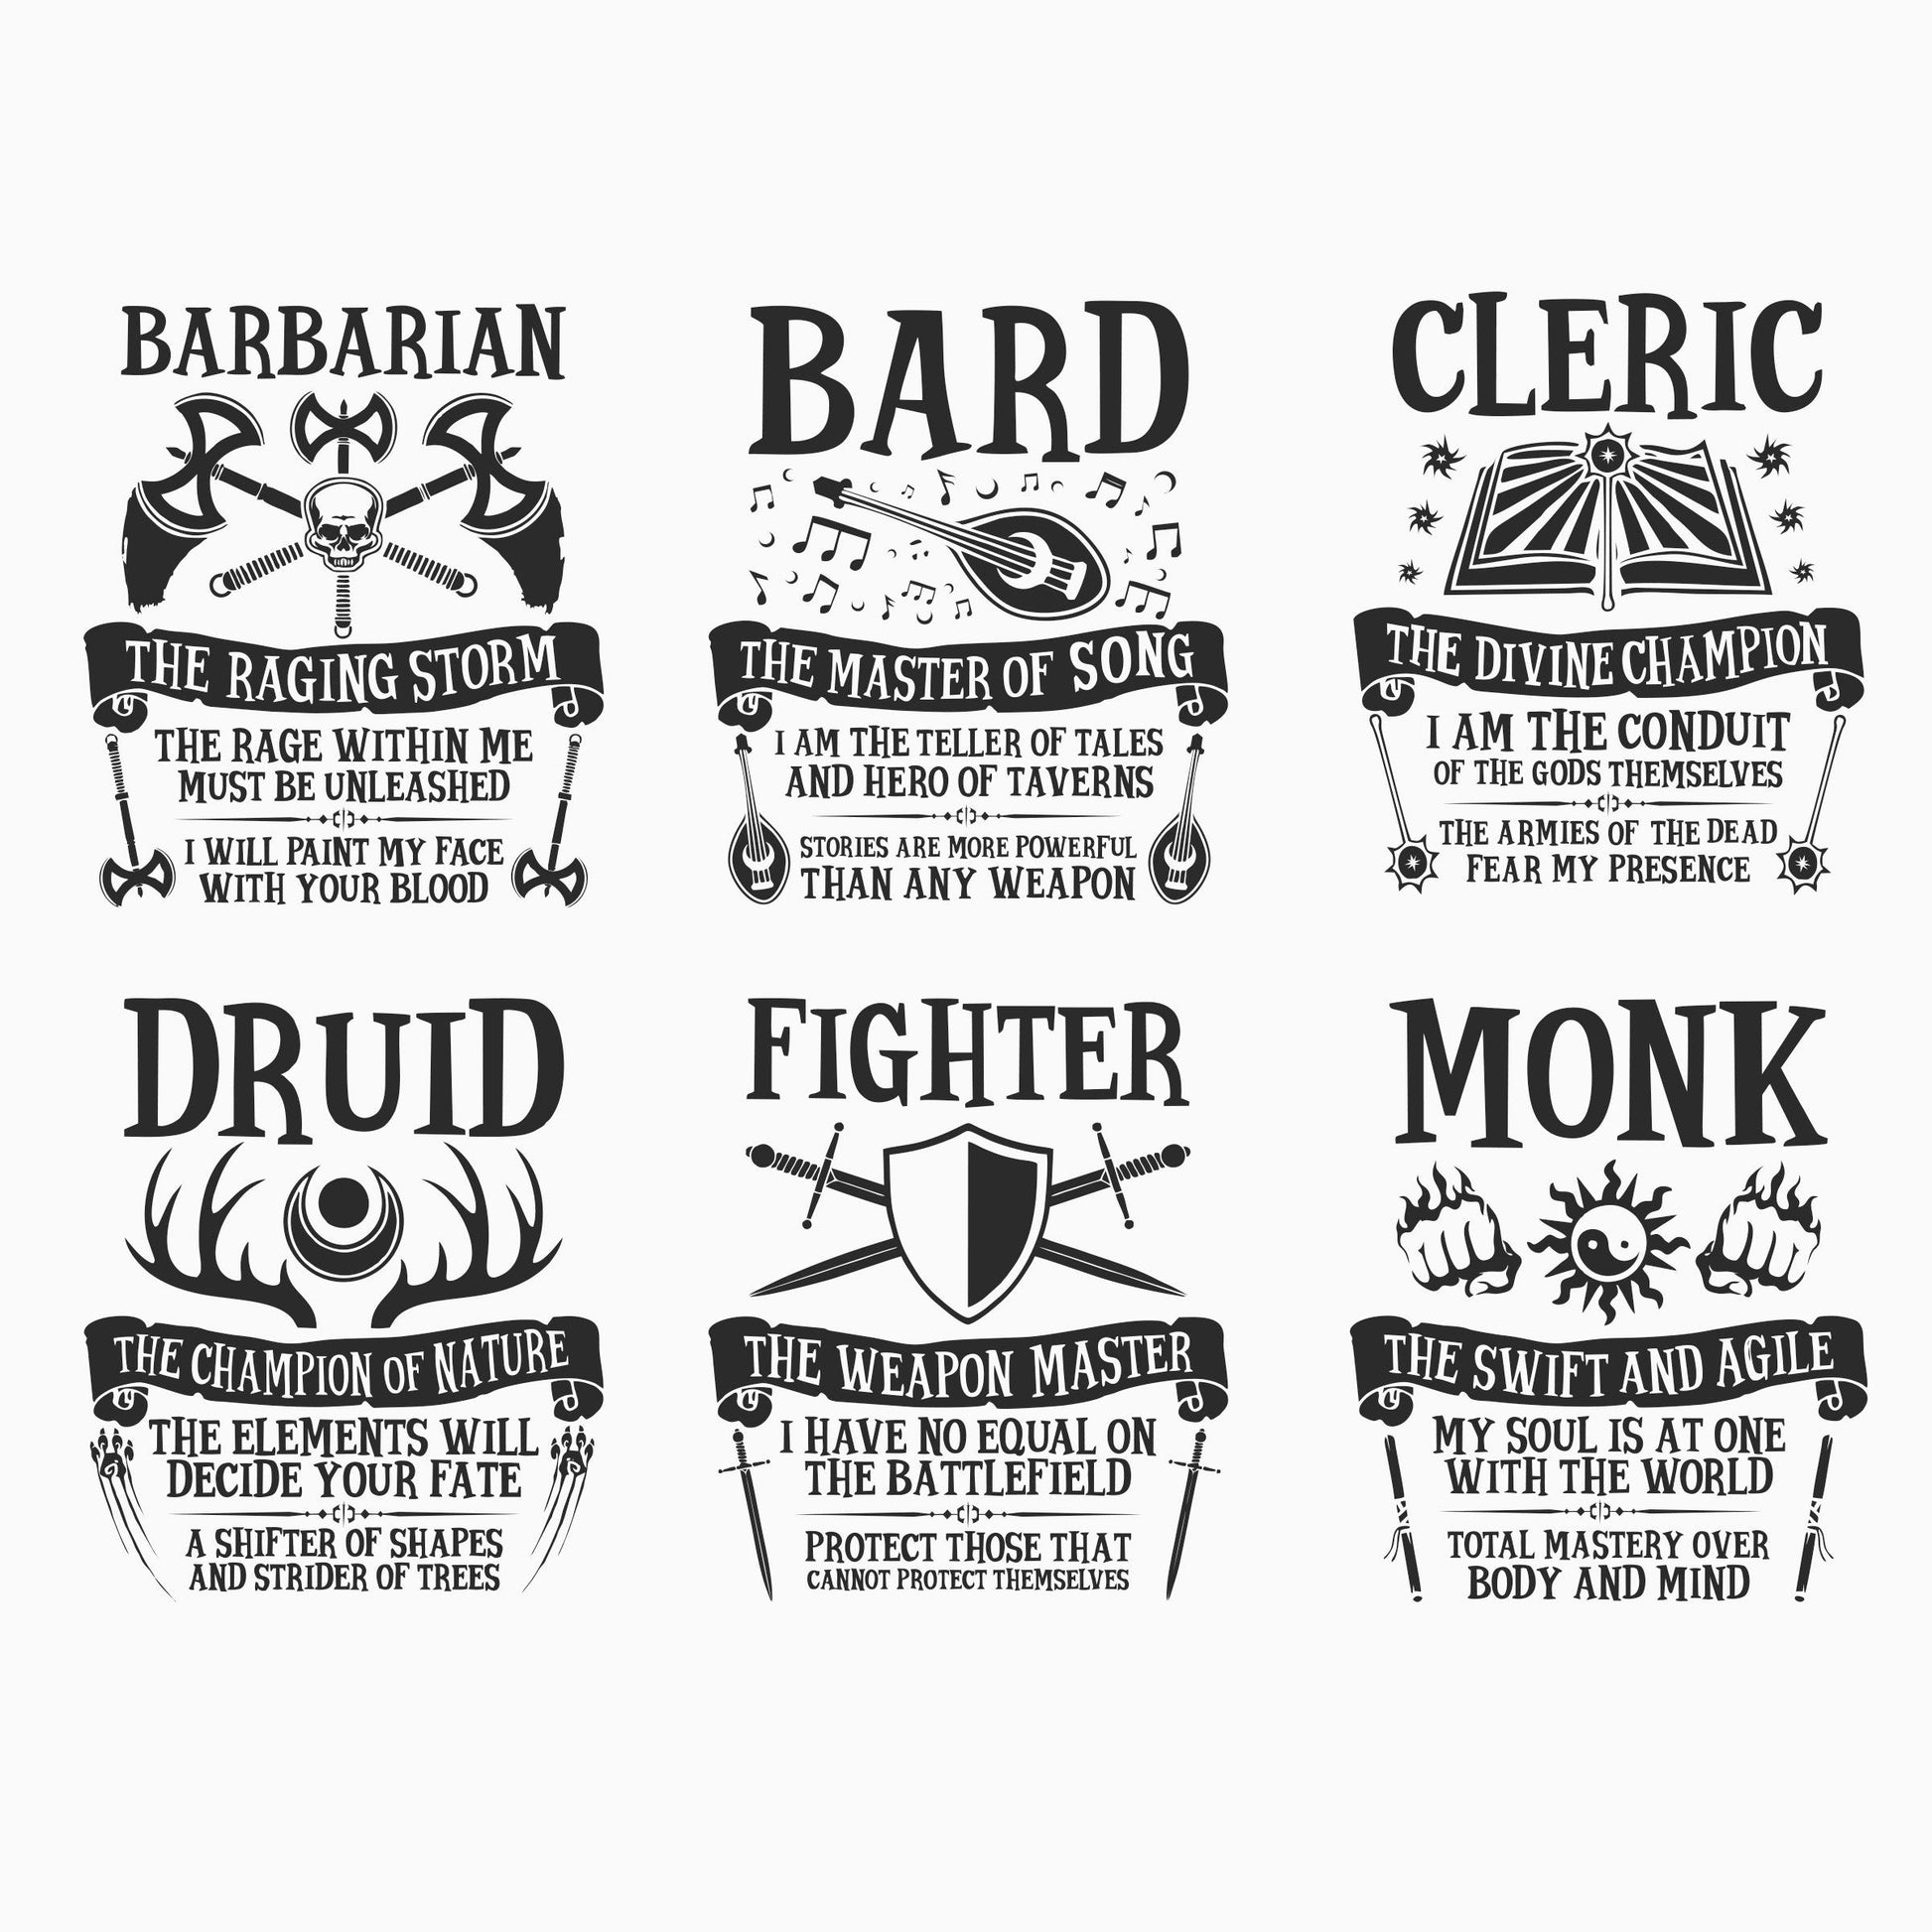 D&D Class Wood Engraved Display, 13 Choices (12 Classes + DM), DnD / Pathfinder / Tabletop RPG Gaming Posters